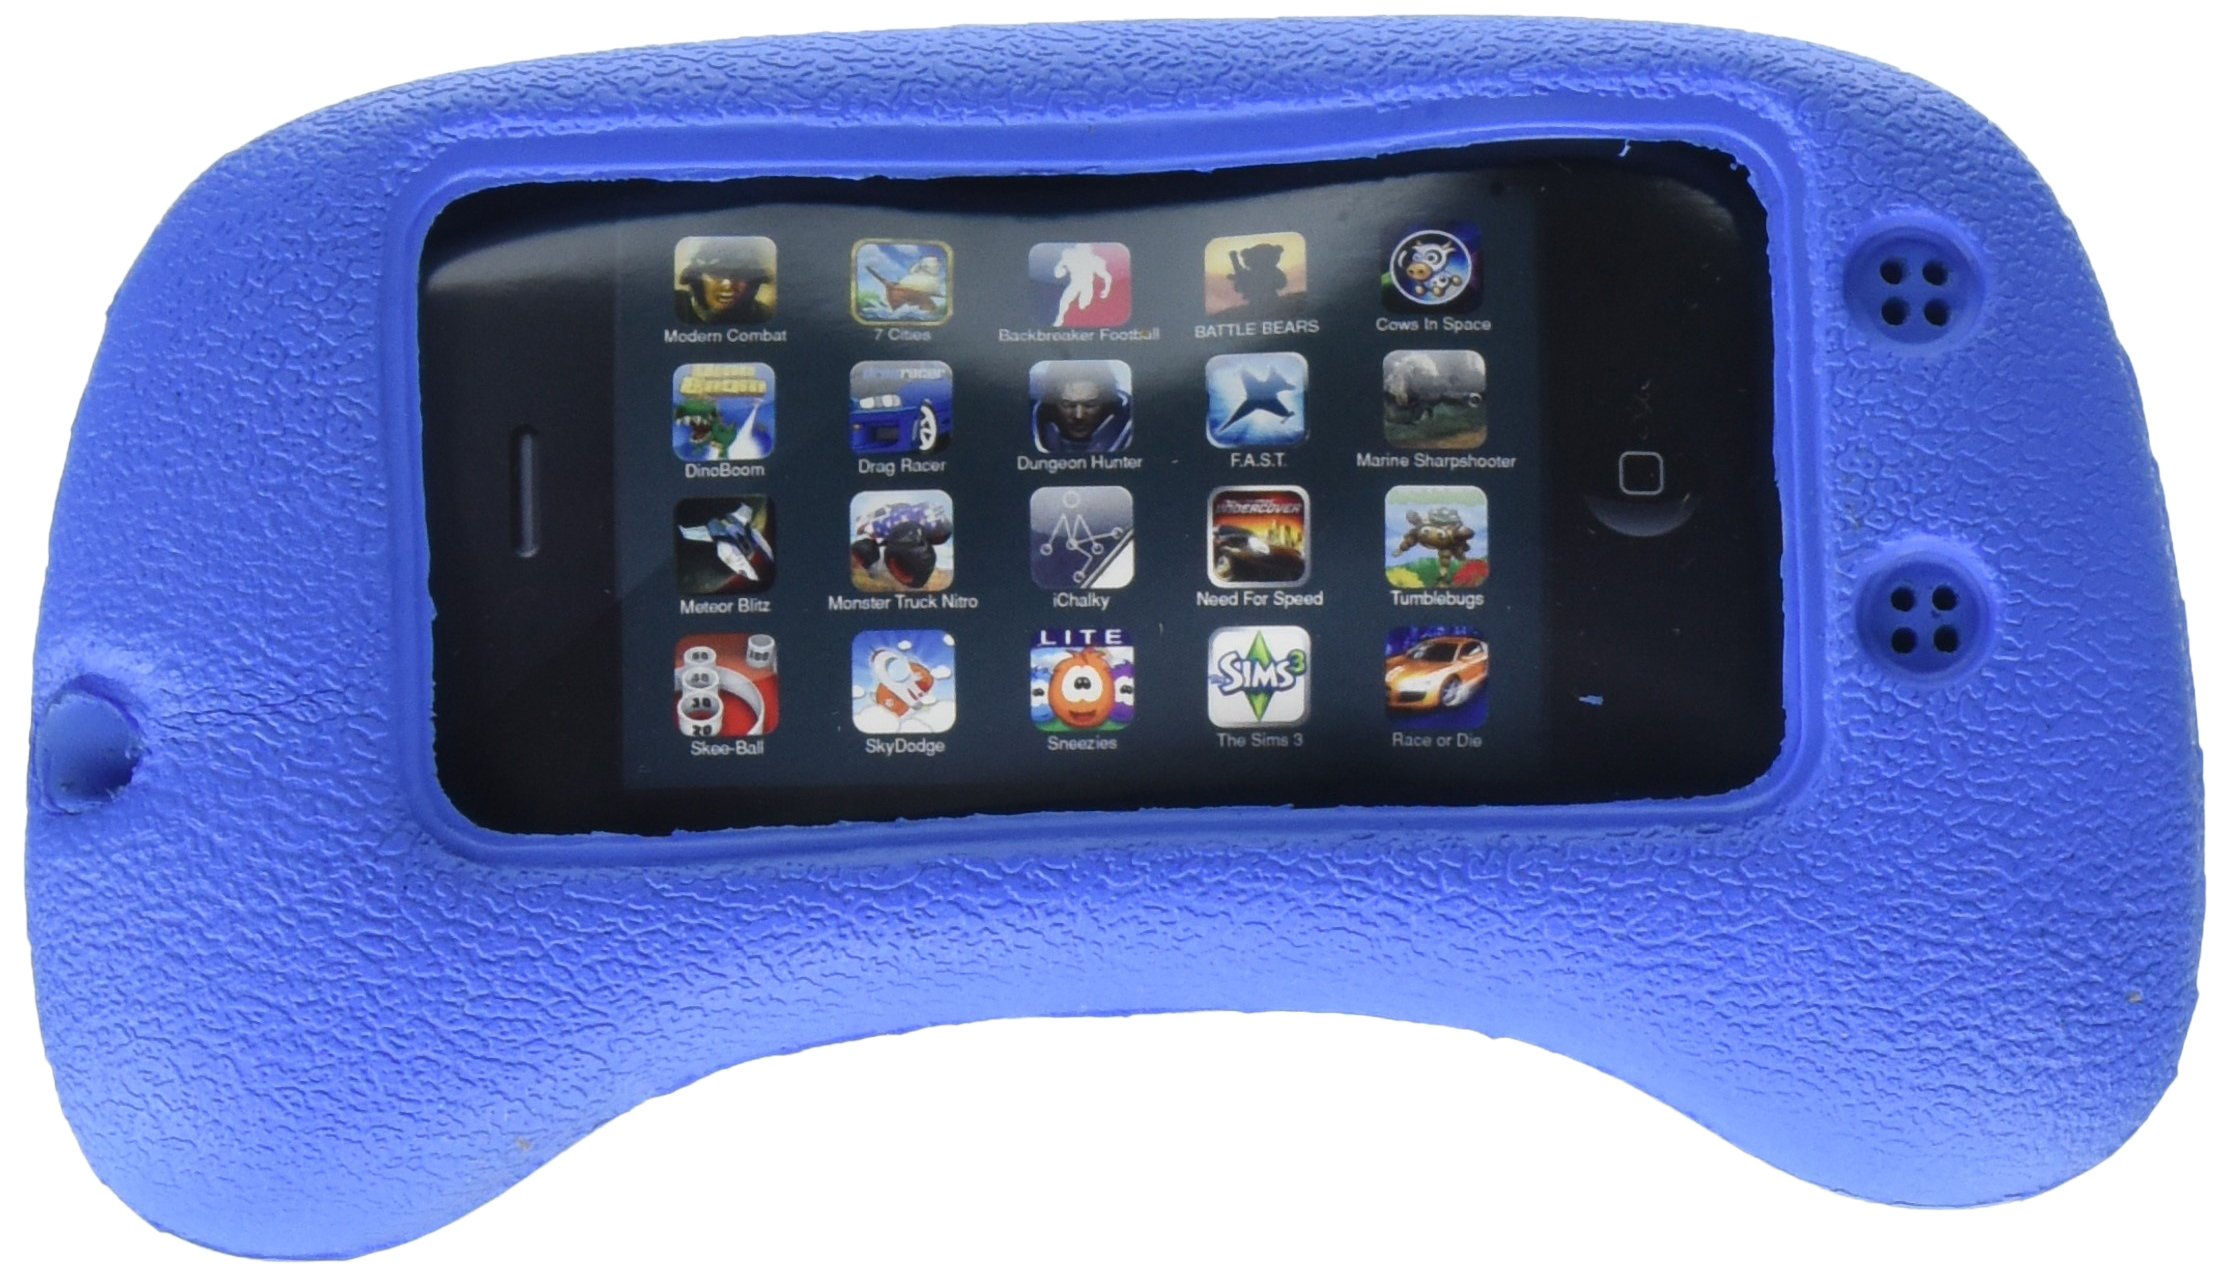 GRANDTEC SQZ-1000i Squeez Dock for iPod Touch (Blue)